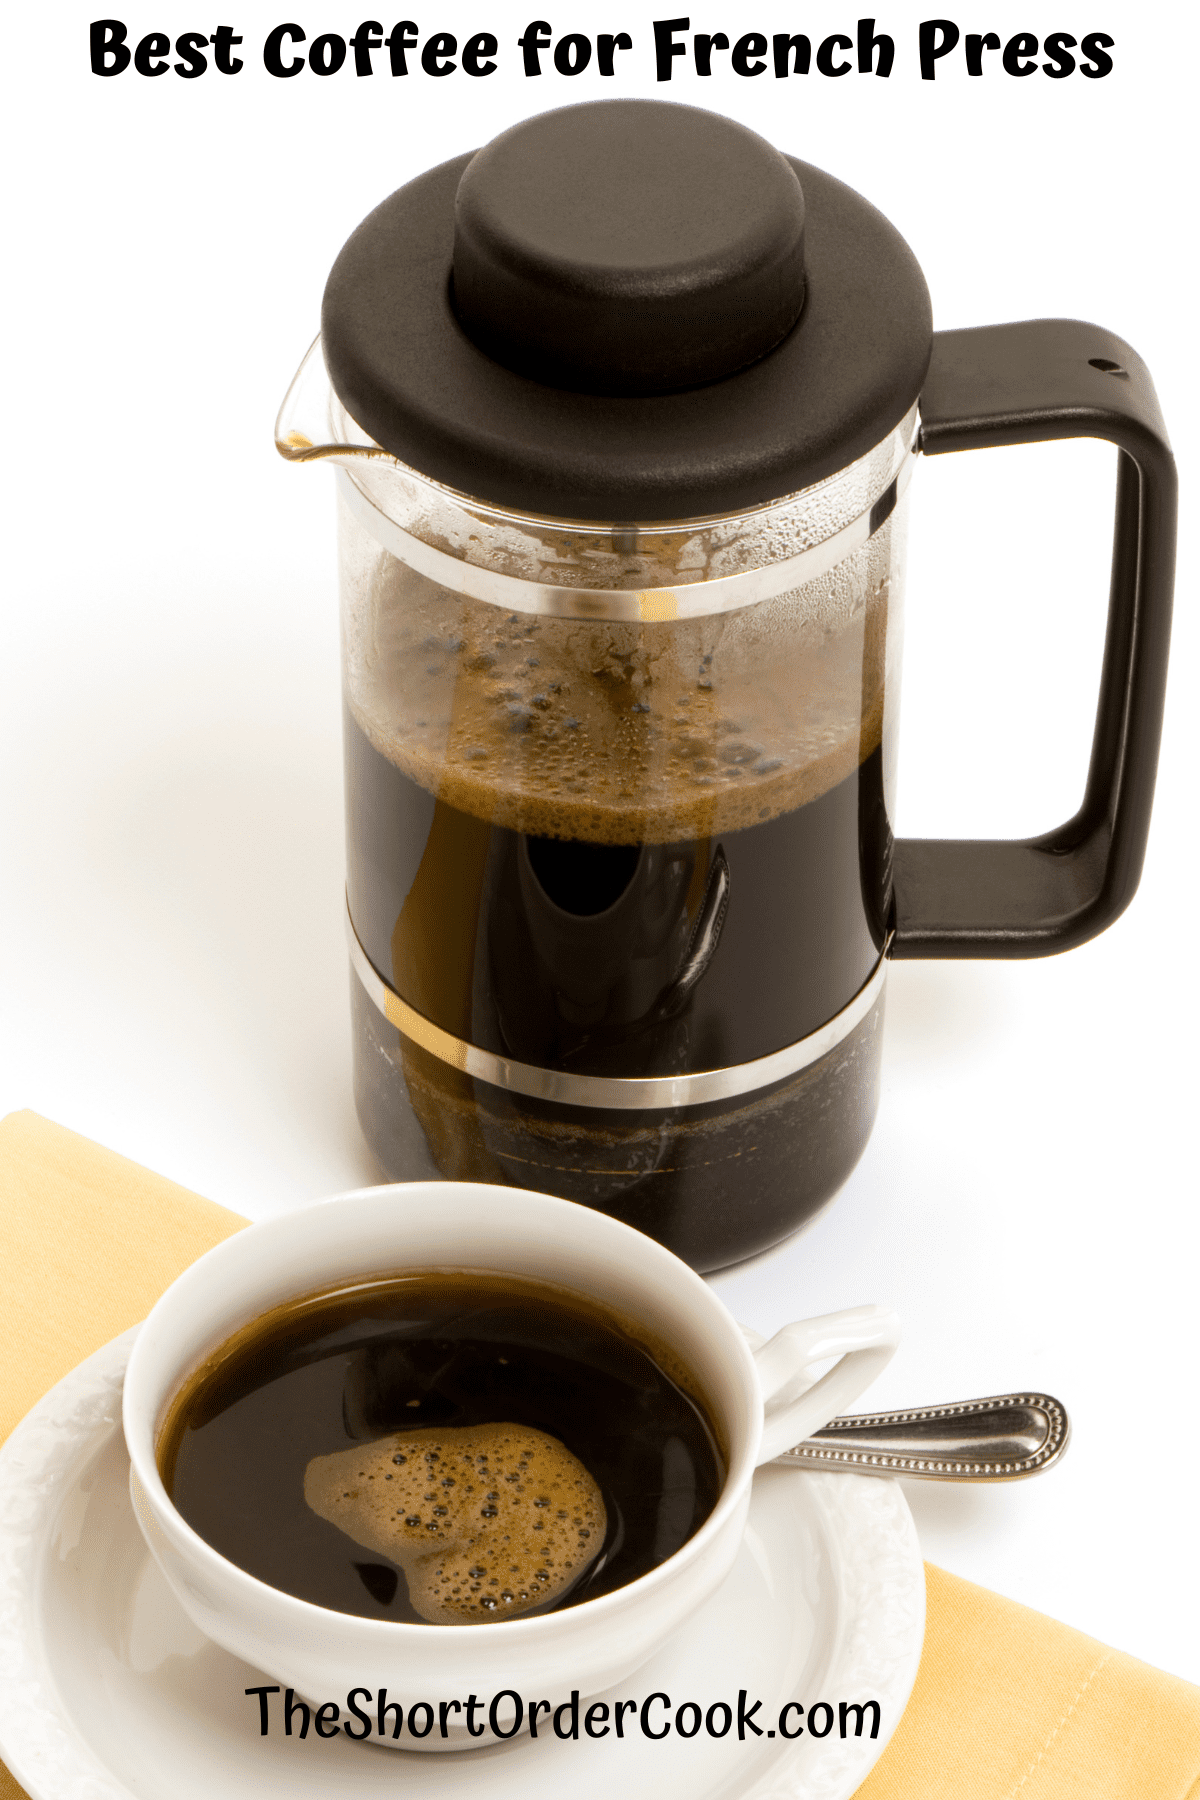 A french press filled with coffee and a full cup of coffee.